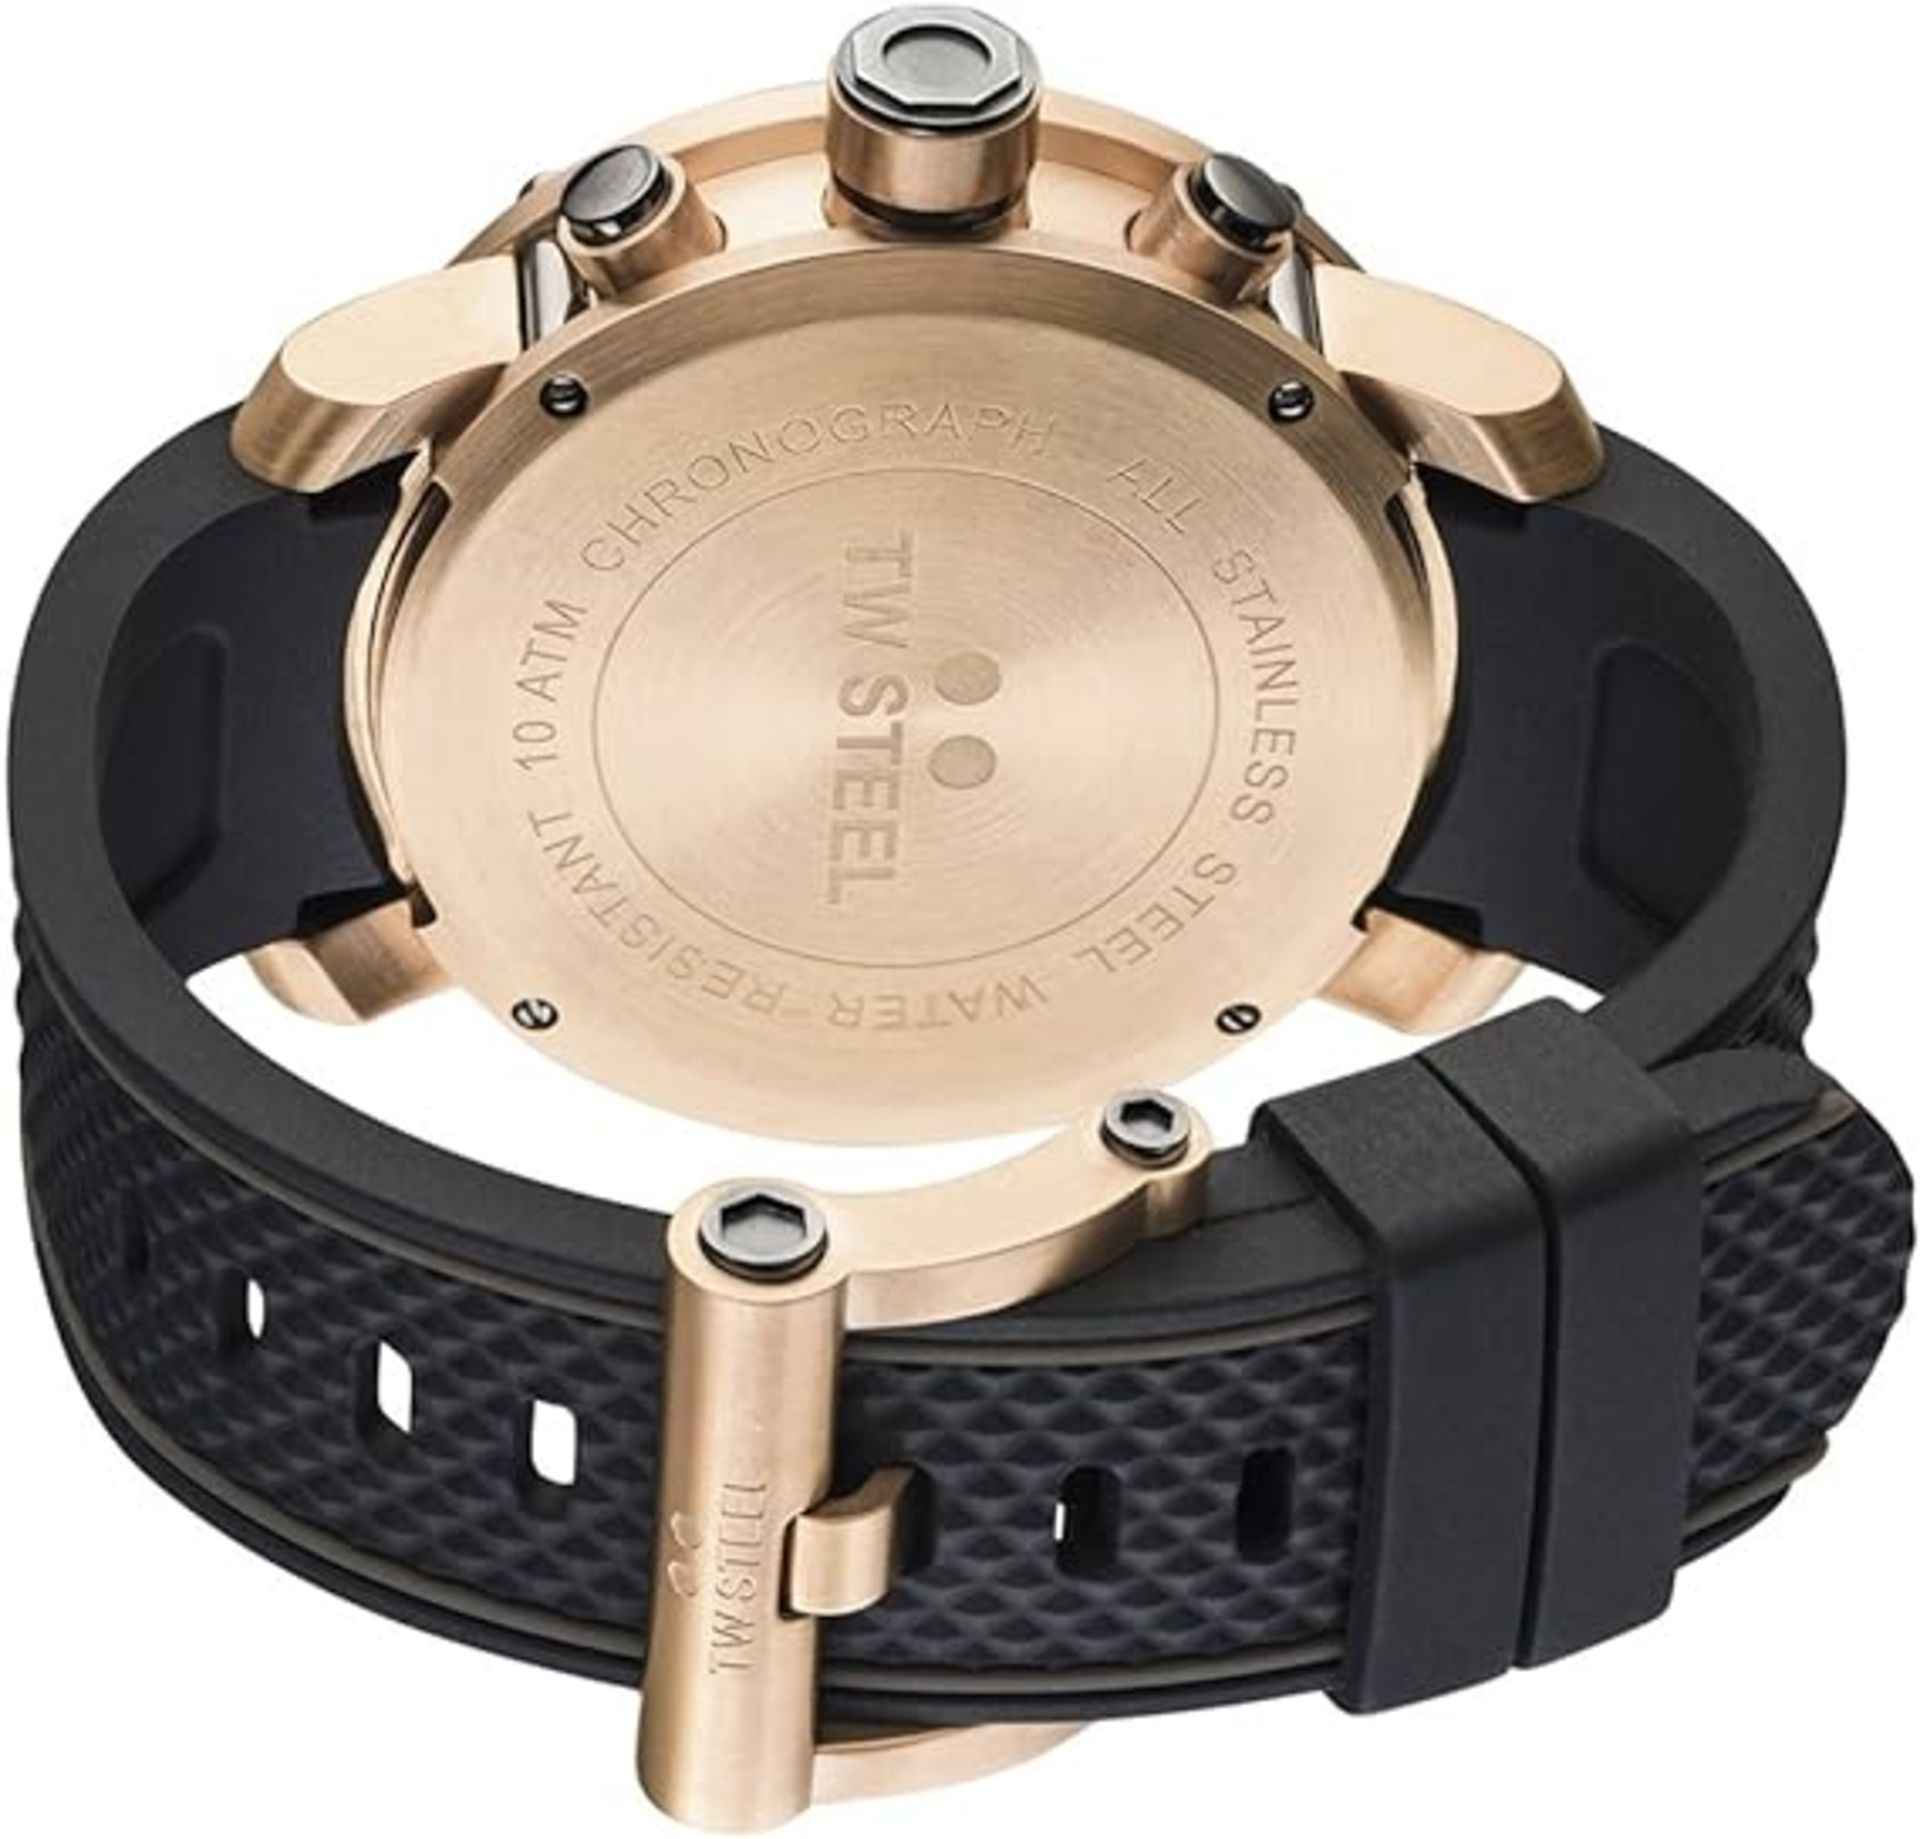 BRAND NEW TW STEEL GENTS GRANDEUR TECH CHRONOGRAPH ROSE GOLD WRIST WATCH RRP £279 S/R - Image 2 of 4